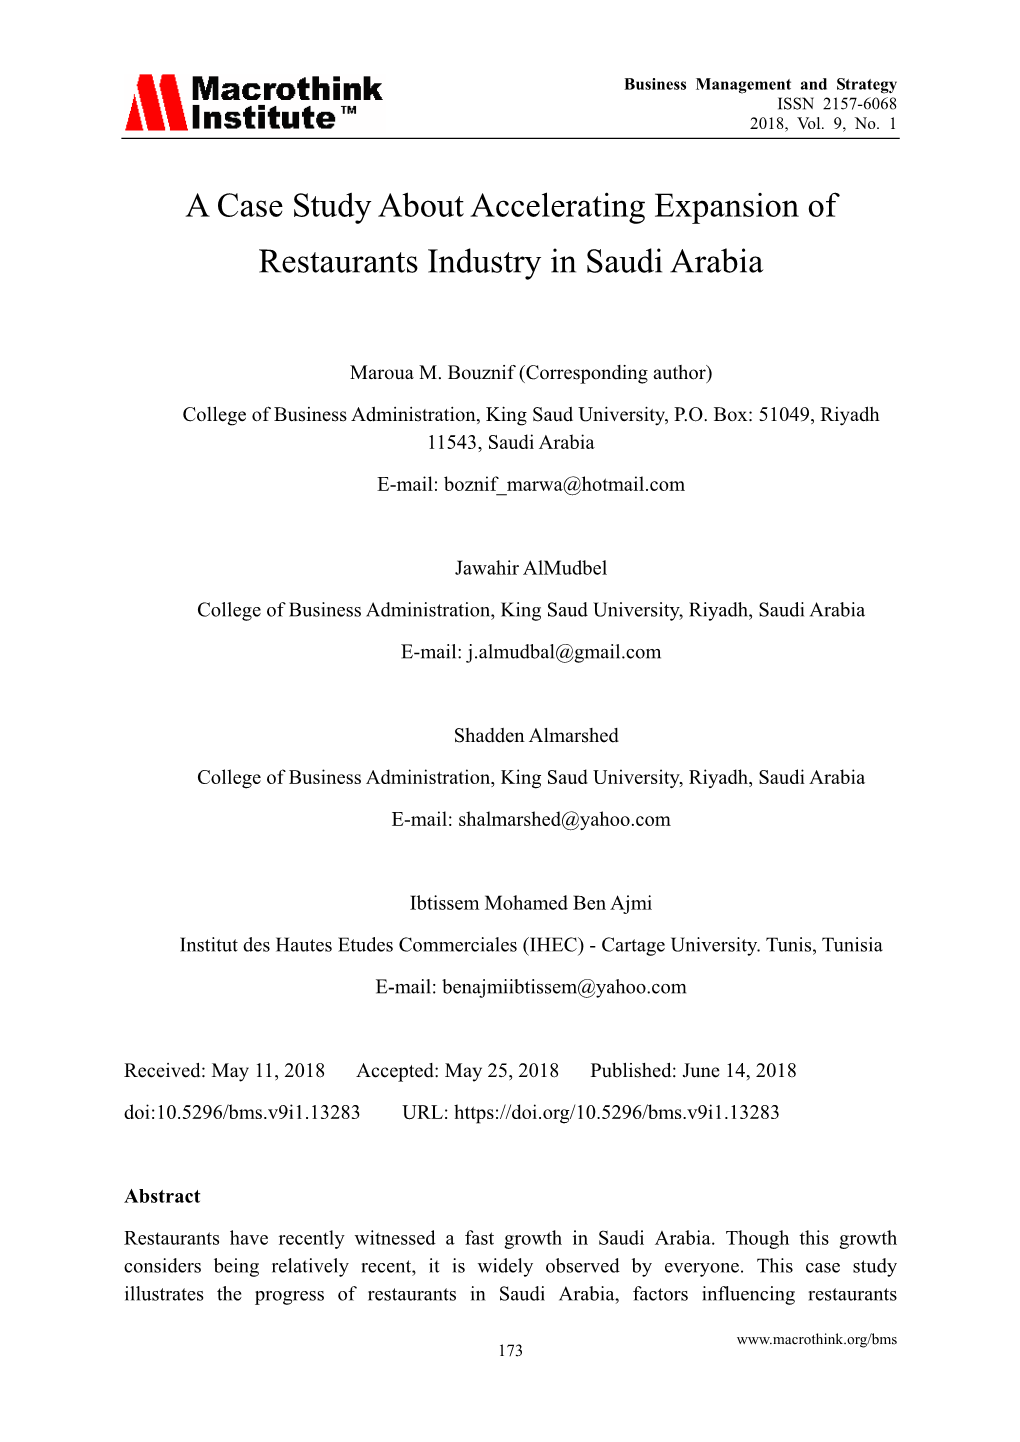 A Case Study About Accelerating Expansion of Restaurants Industry in Saudi Arabia